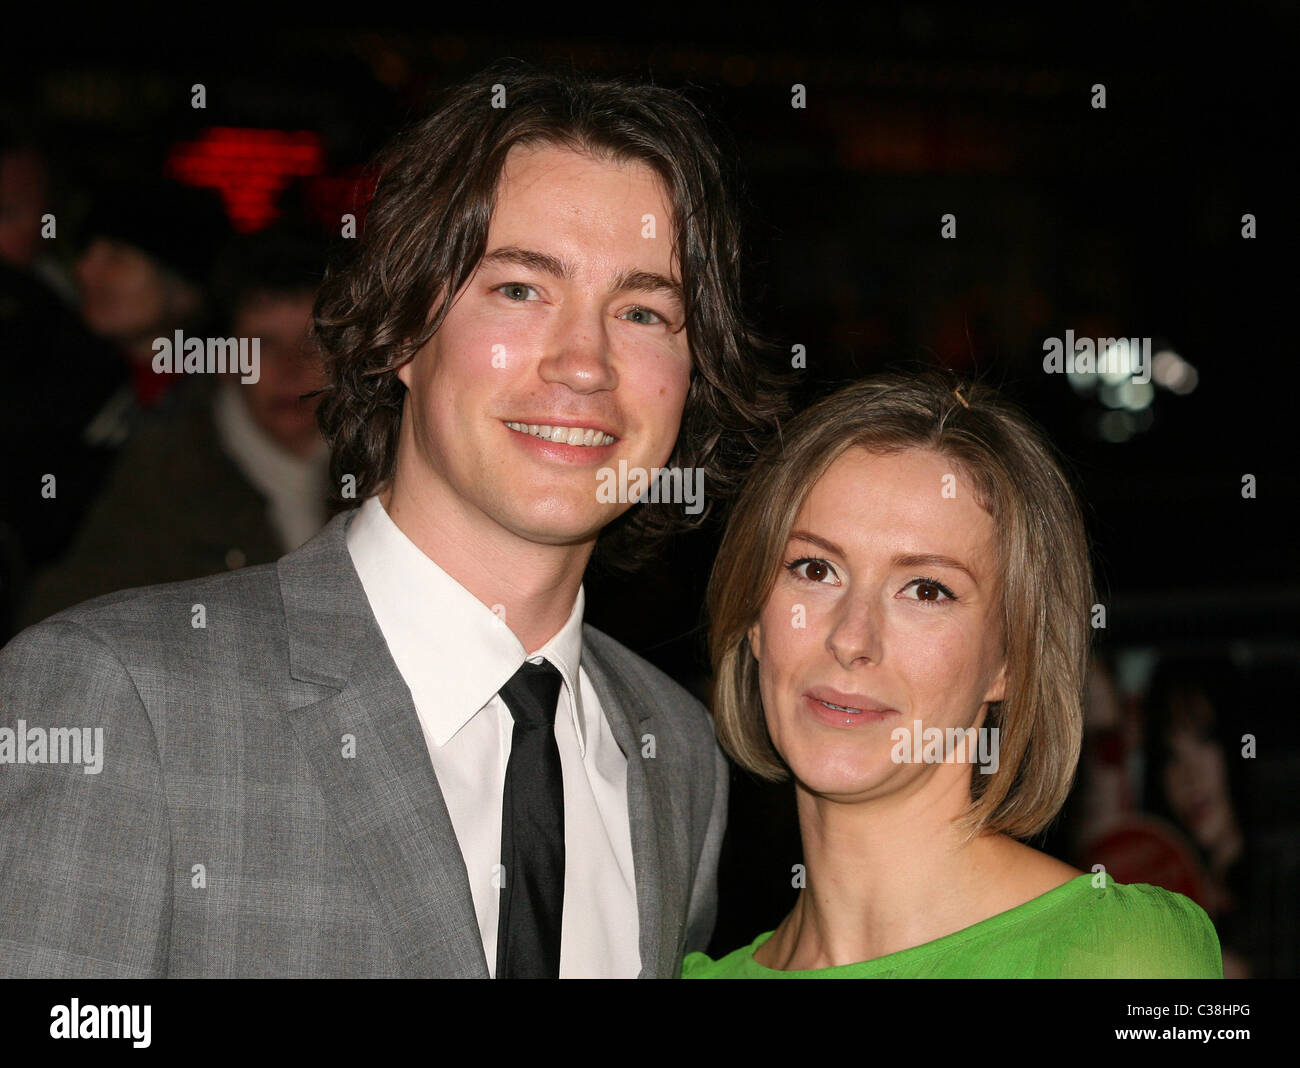 Tom Wisdom and Guest World Premiere of 'The Boat That Rocked' held at The Odeon, Leicester Square - arrivals London, England - Stock Photo